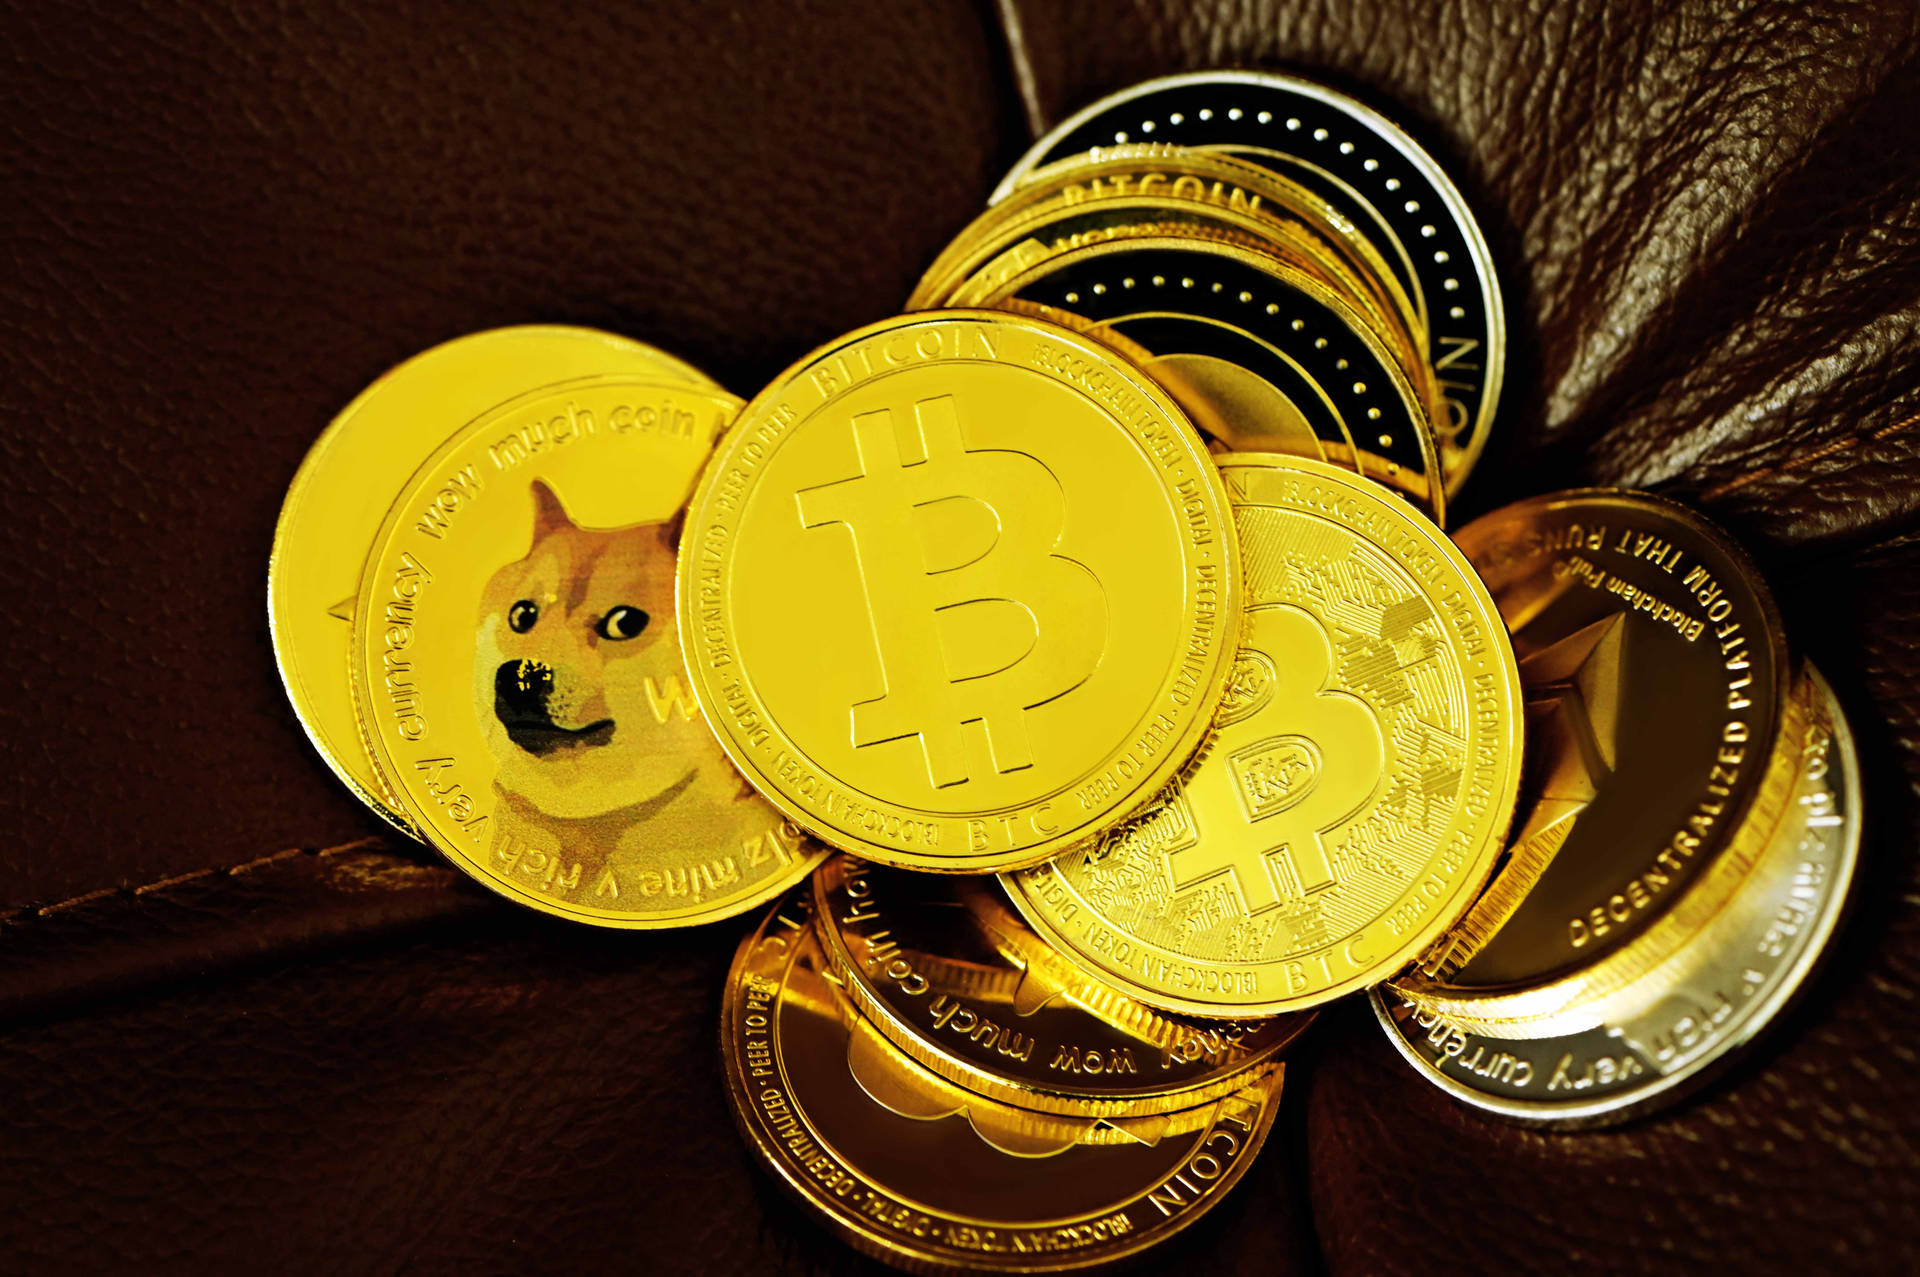 Dogecoin Bitcoin Cryptocurrencies Background